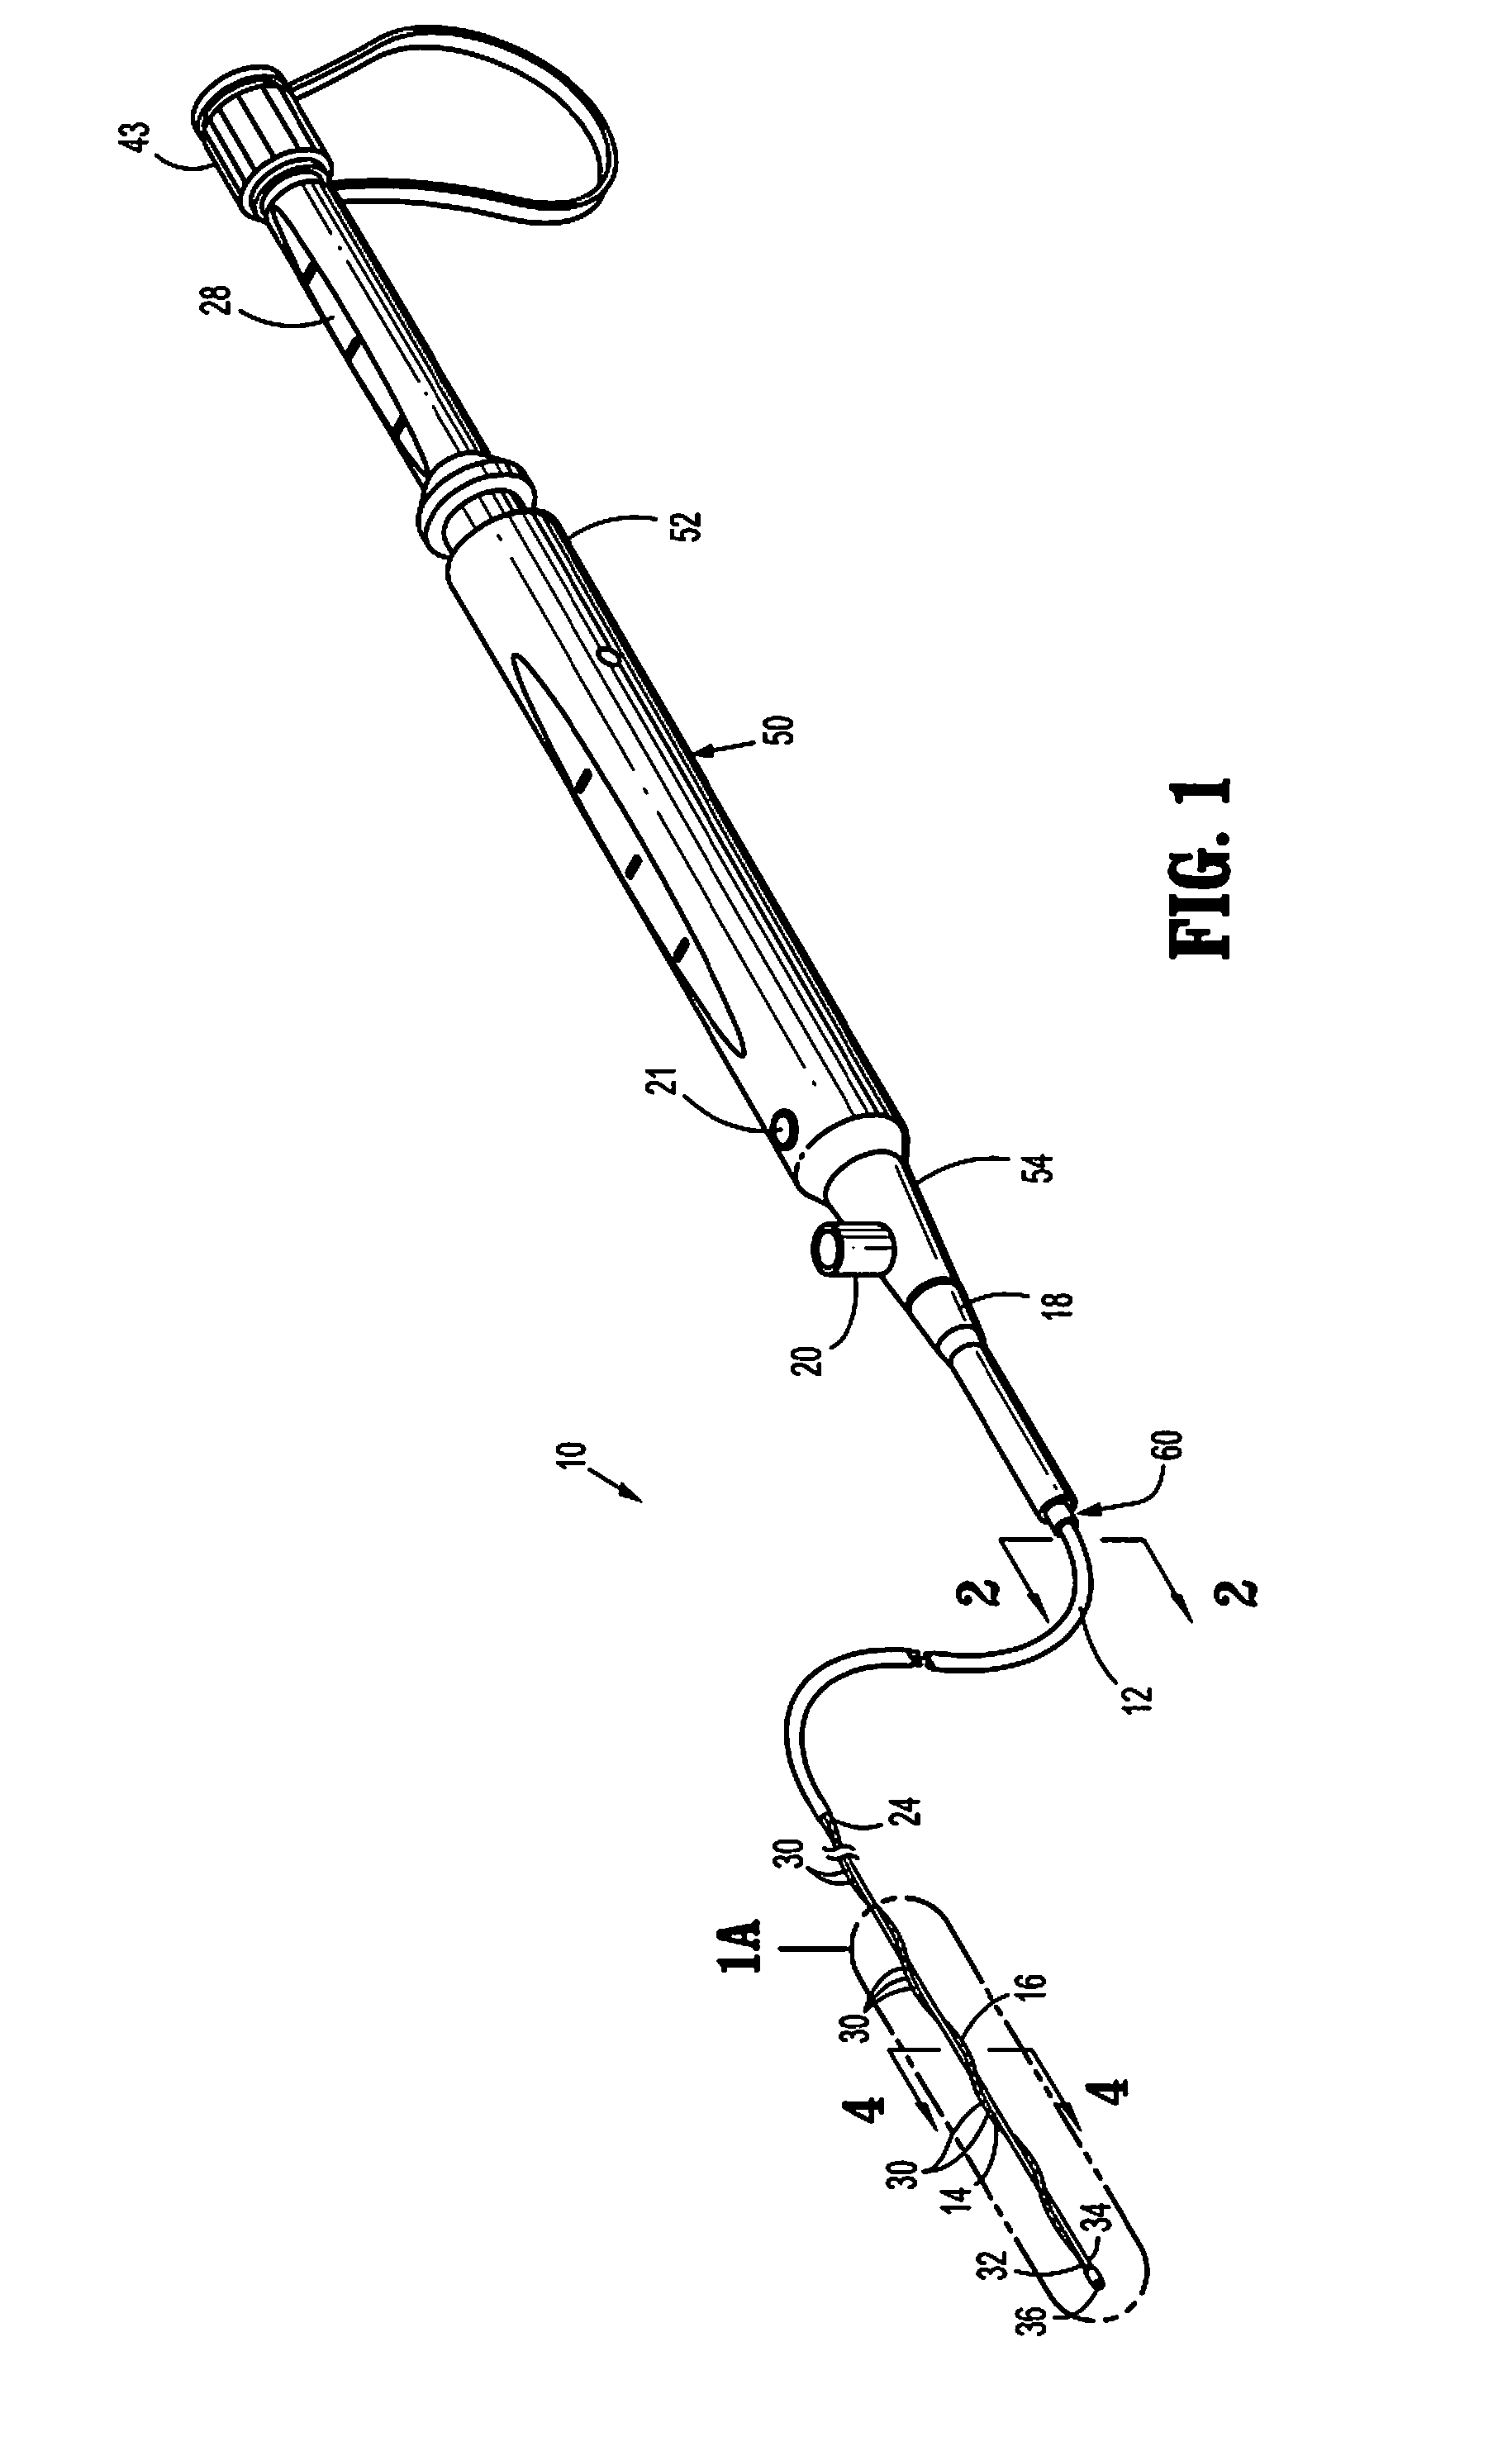 Spirally conformable infusion catheter